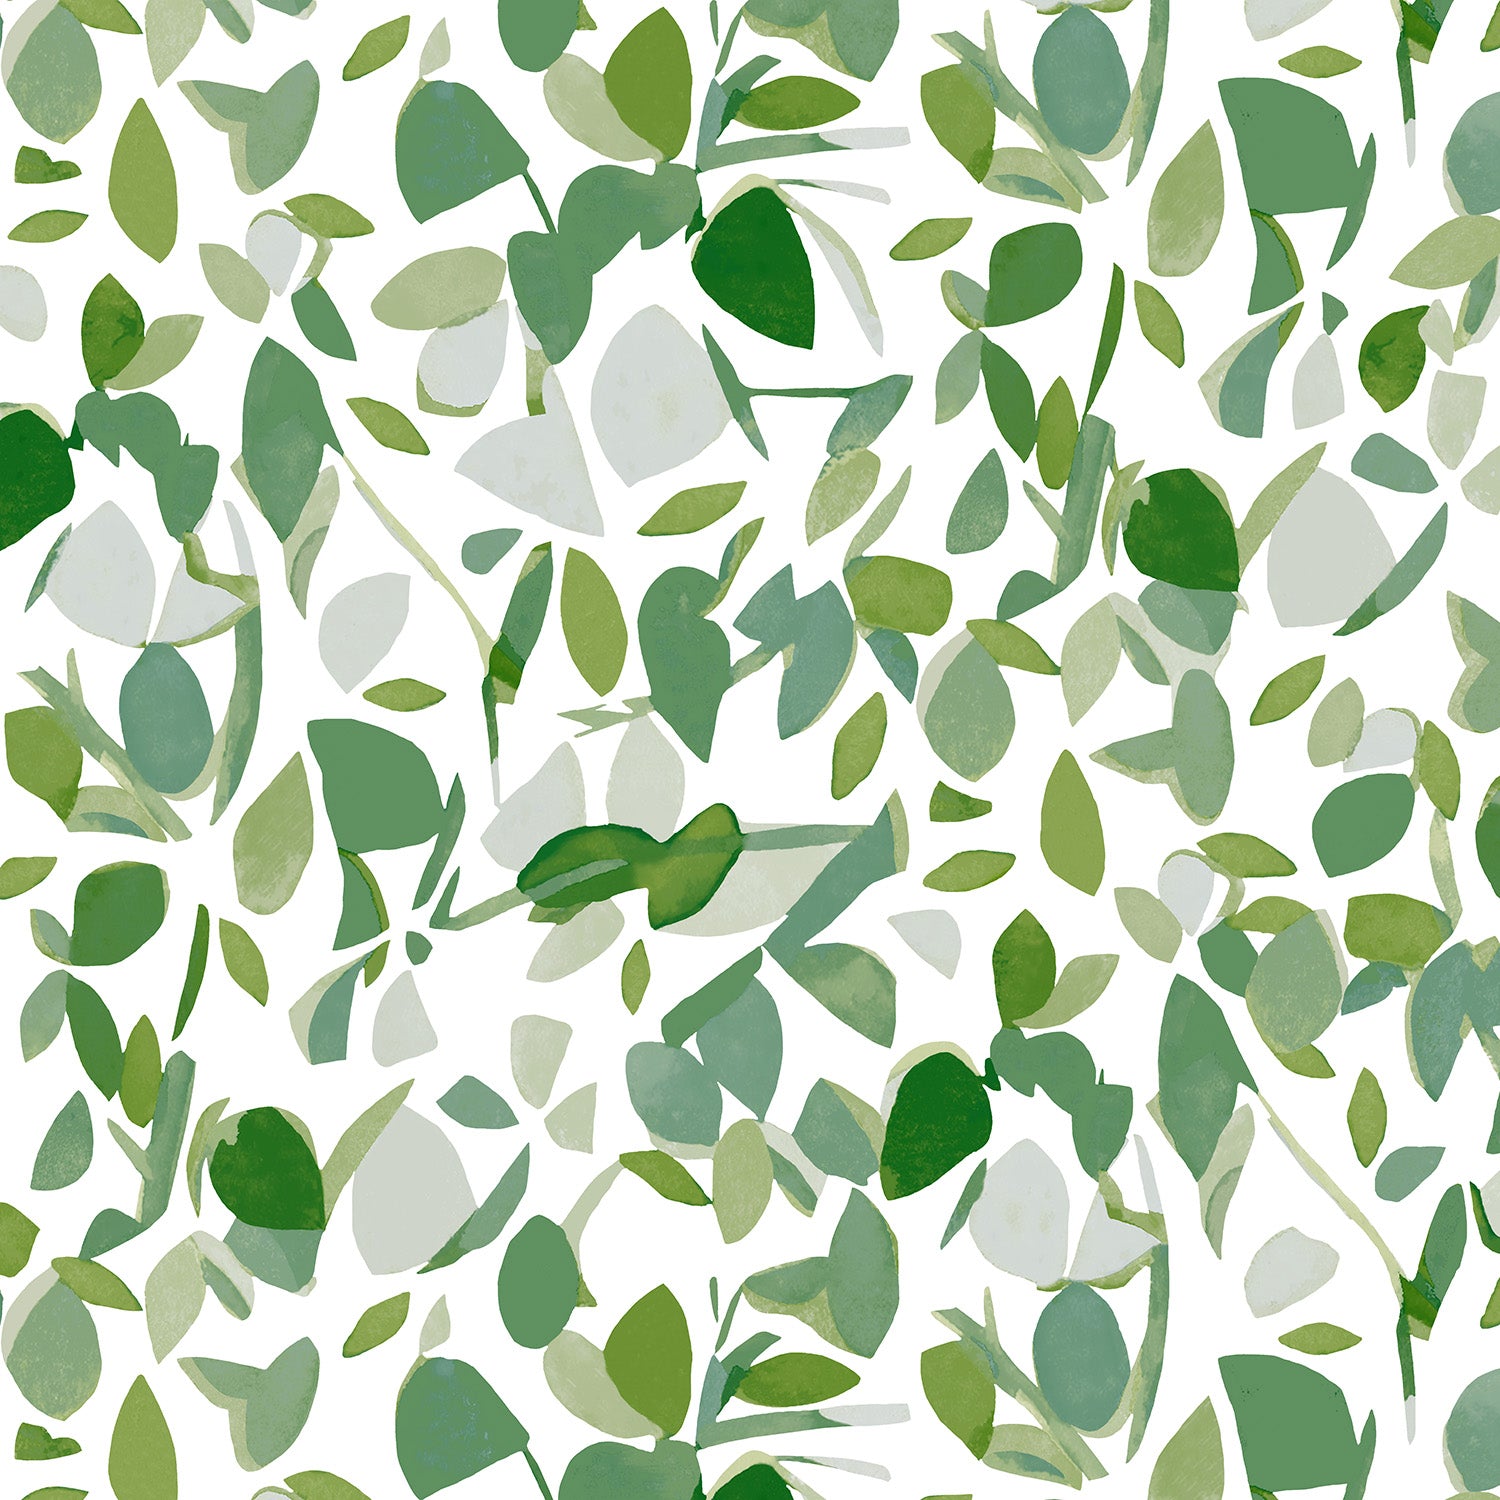 Detail of wallpaper in a minimal leaf print in shades of green and gray on a white field.